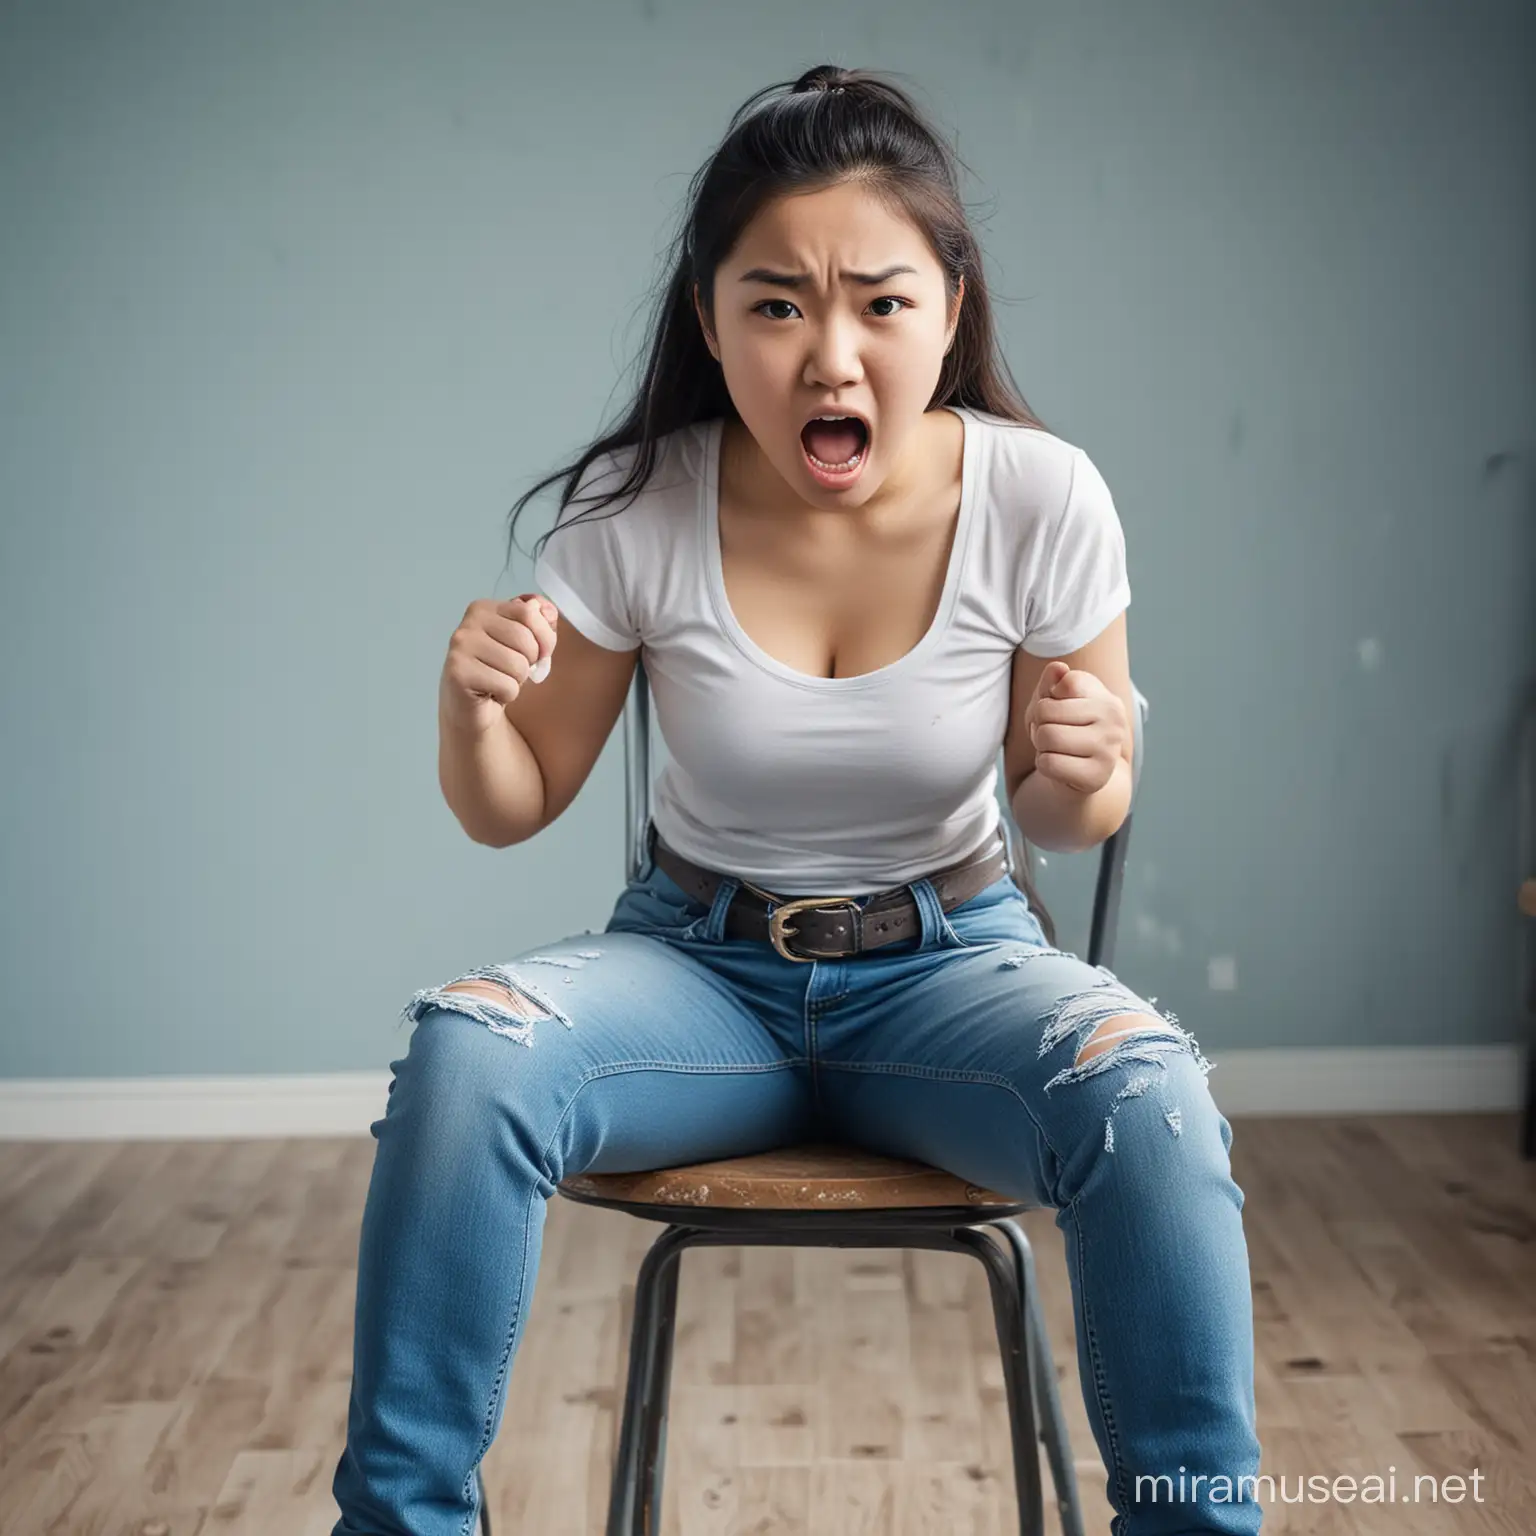 real photo of a curvy young asian girl in rage,14 years,sitting on a chair,angry face,ripped blue faded tight jeans with belt,messy children's room,extremely realistic,skin features,scolding severely the viewer